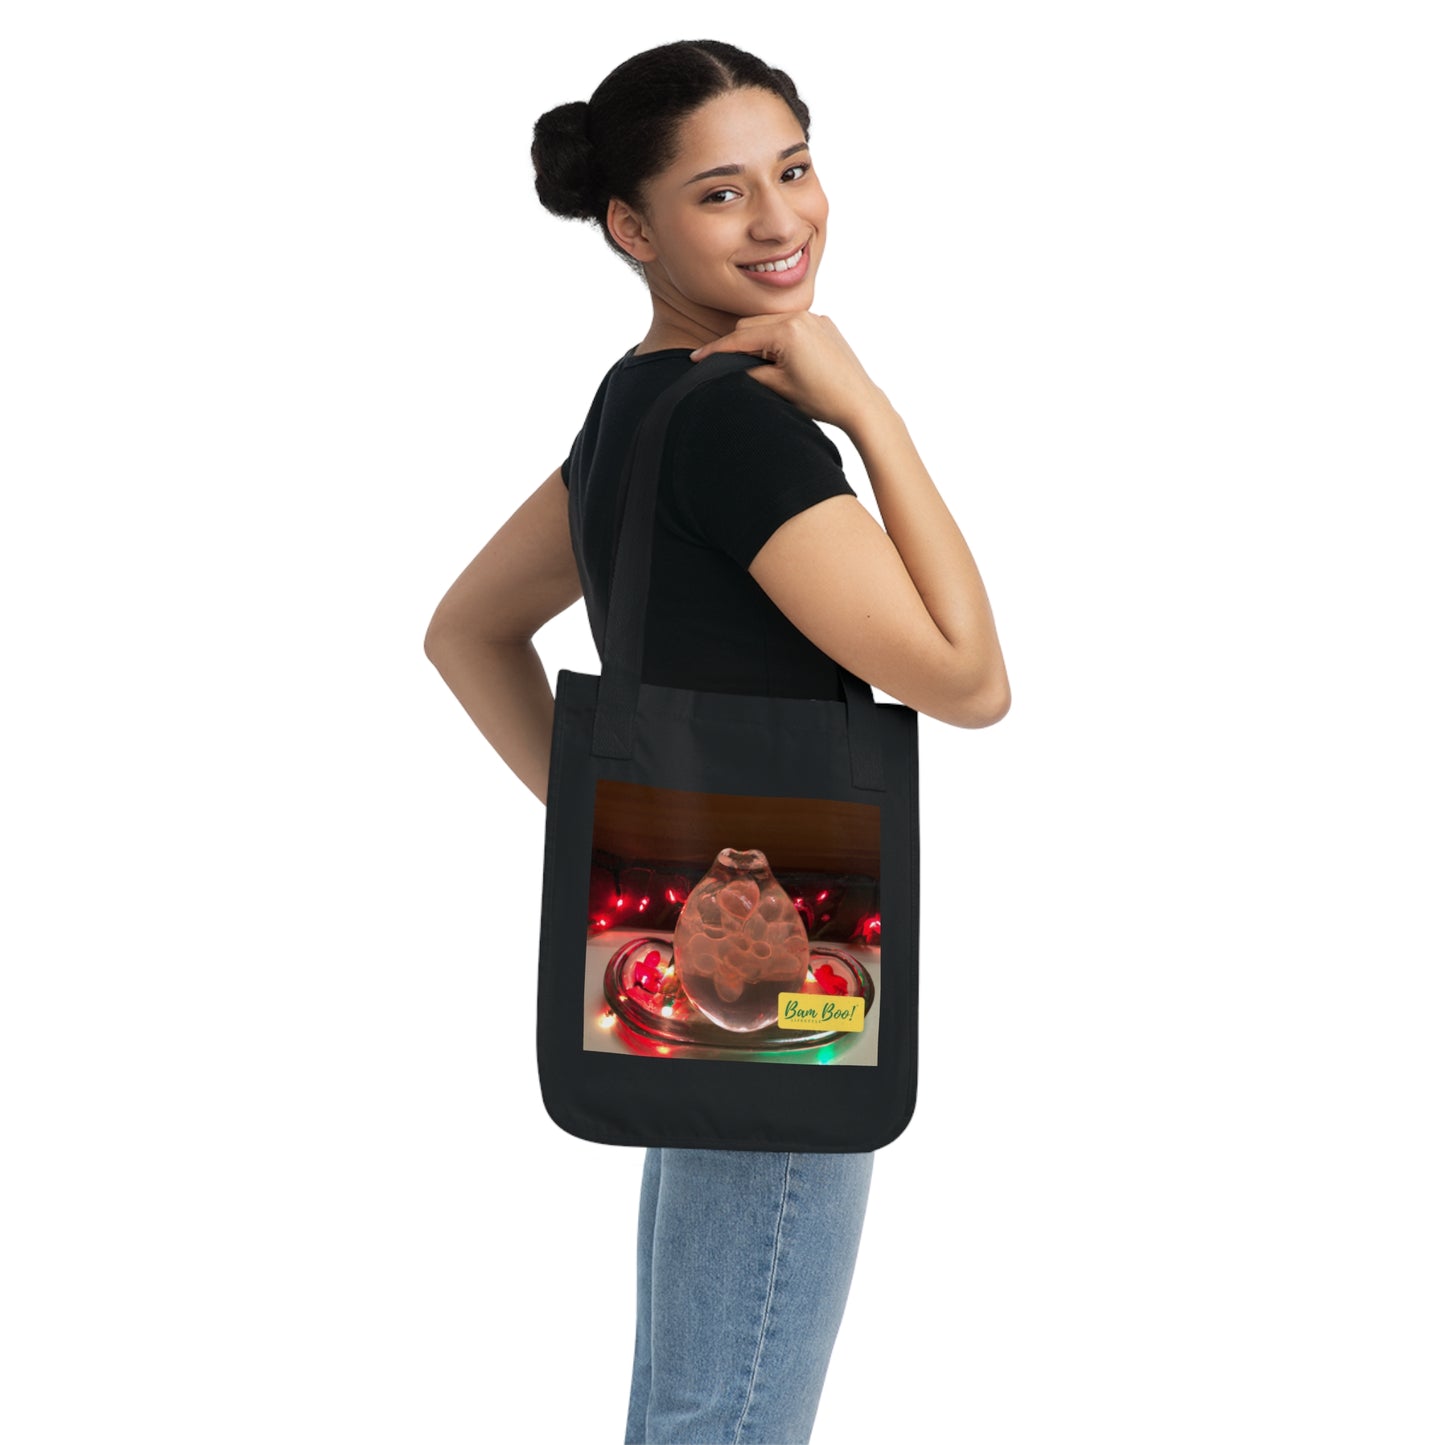 "The Getting Darker Creation" - Bam Boo! Lifestyle Eco-friendly Tote Bag